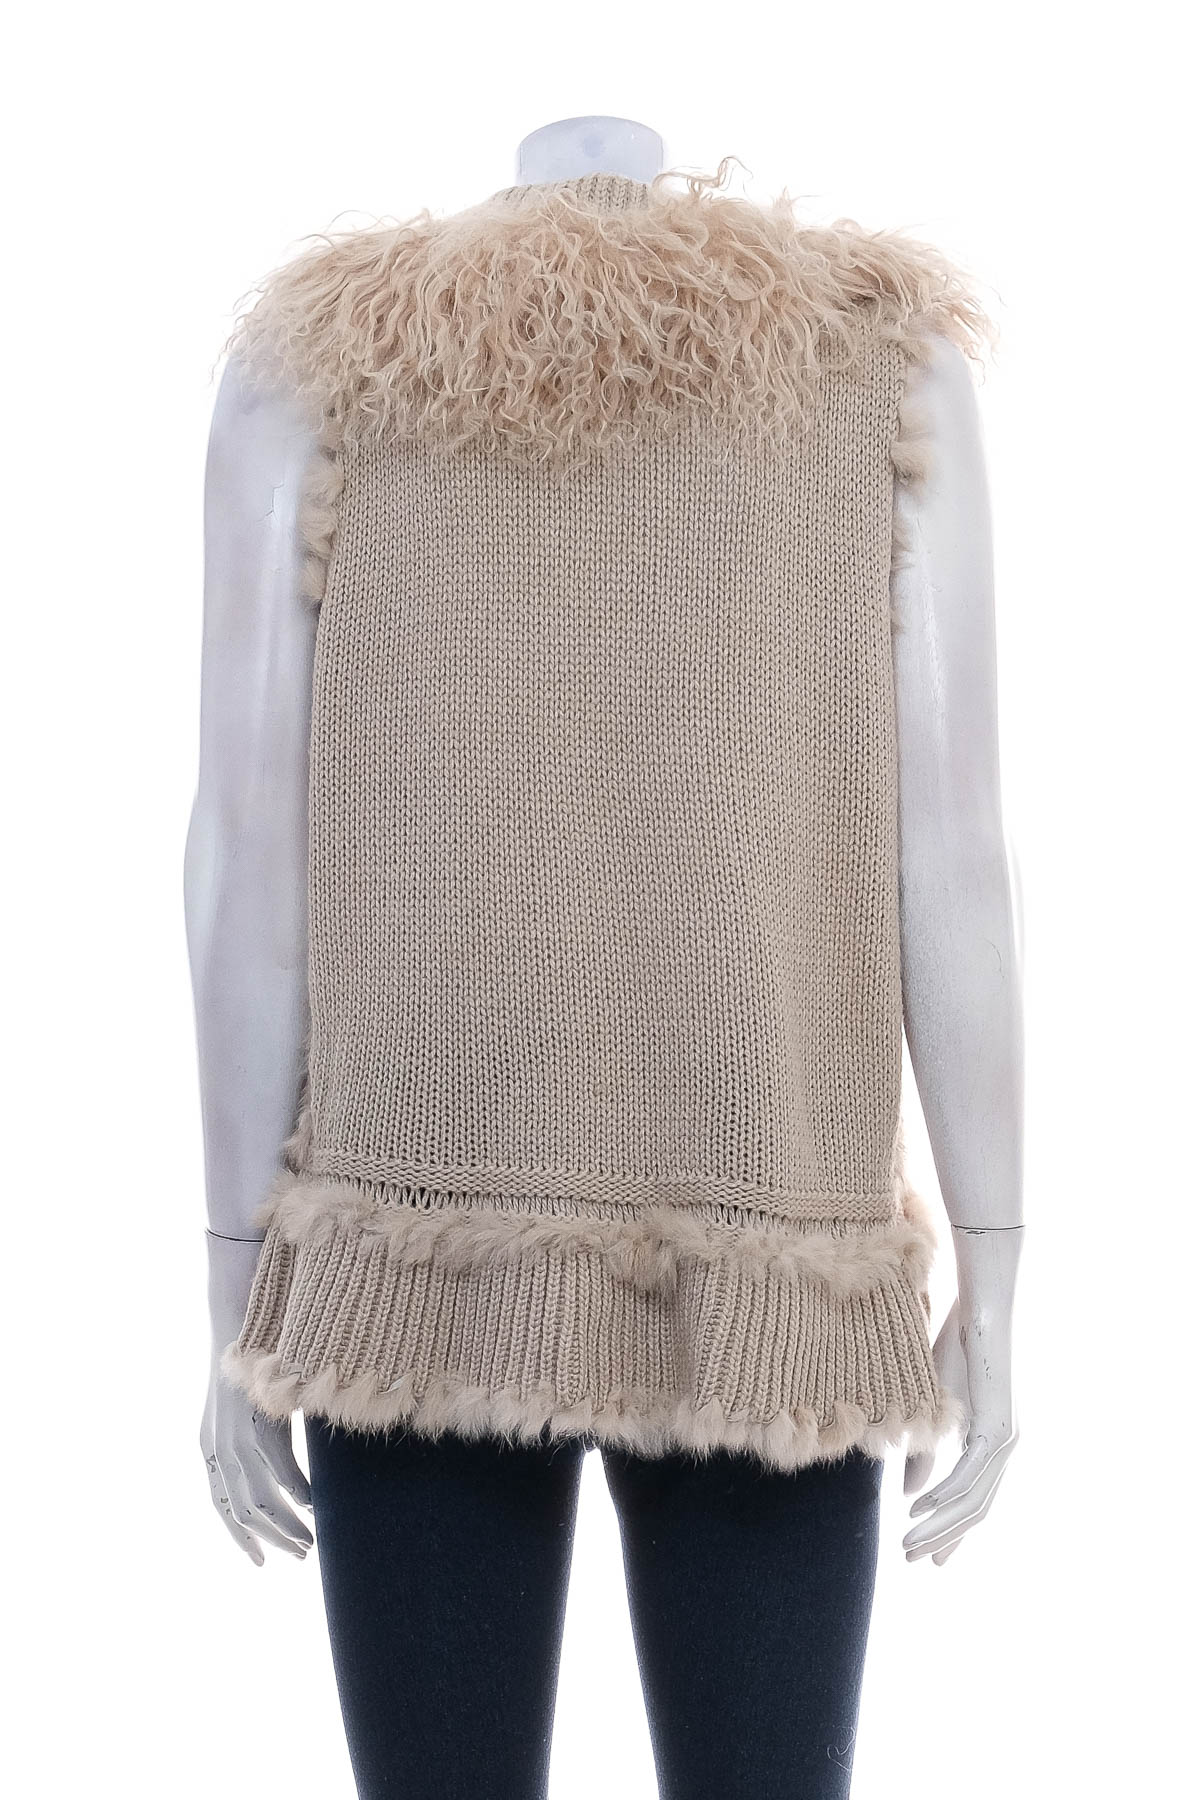 Women's cardigan - Dolce Cabo - 1